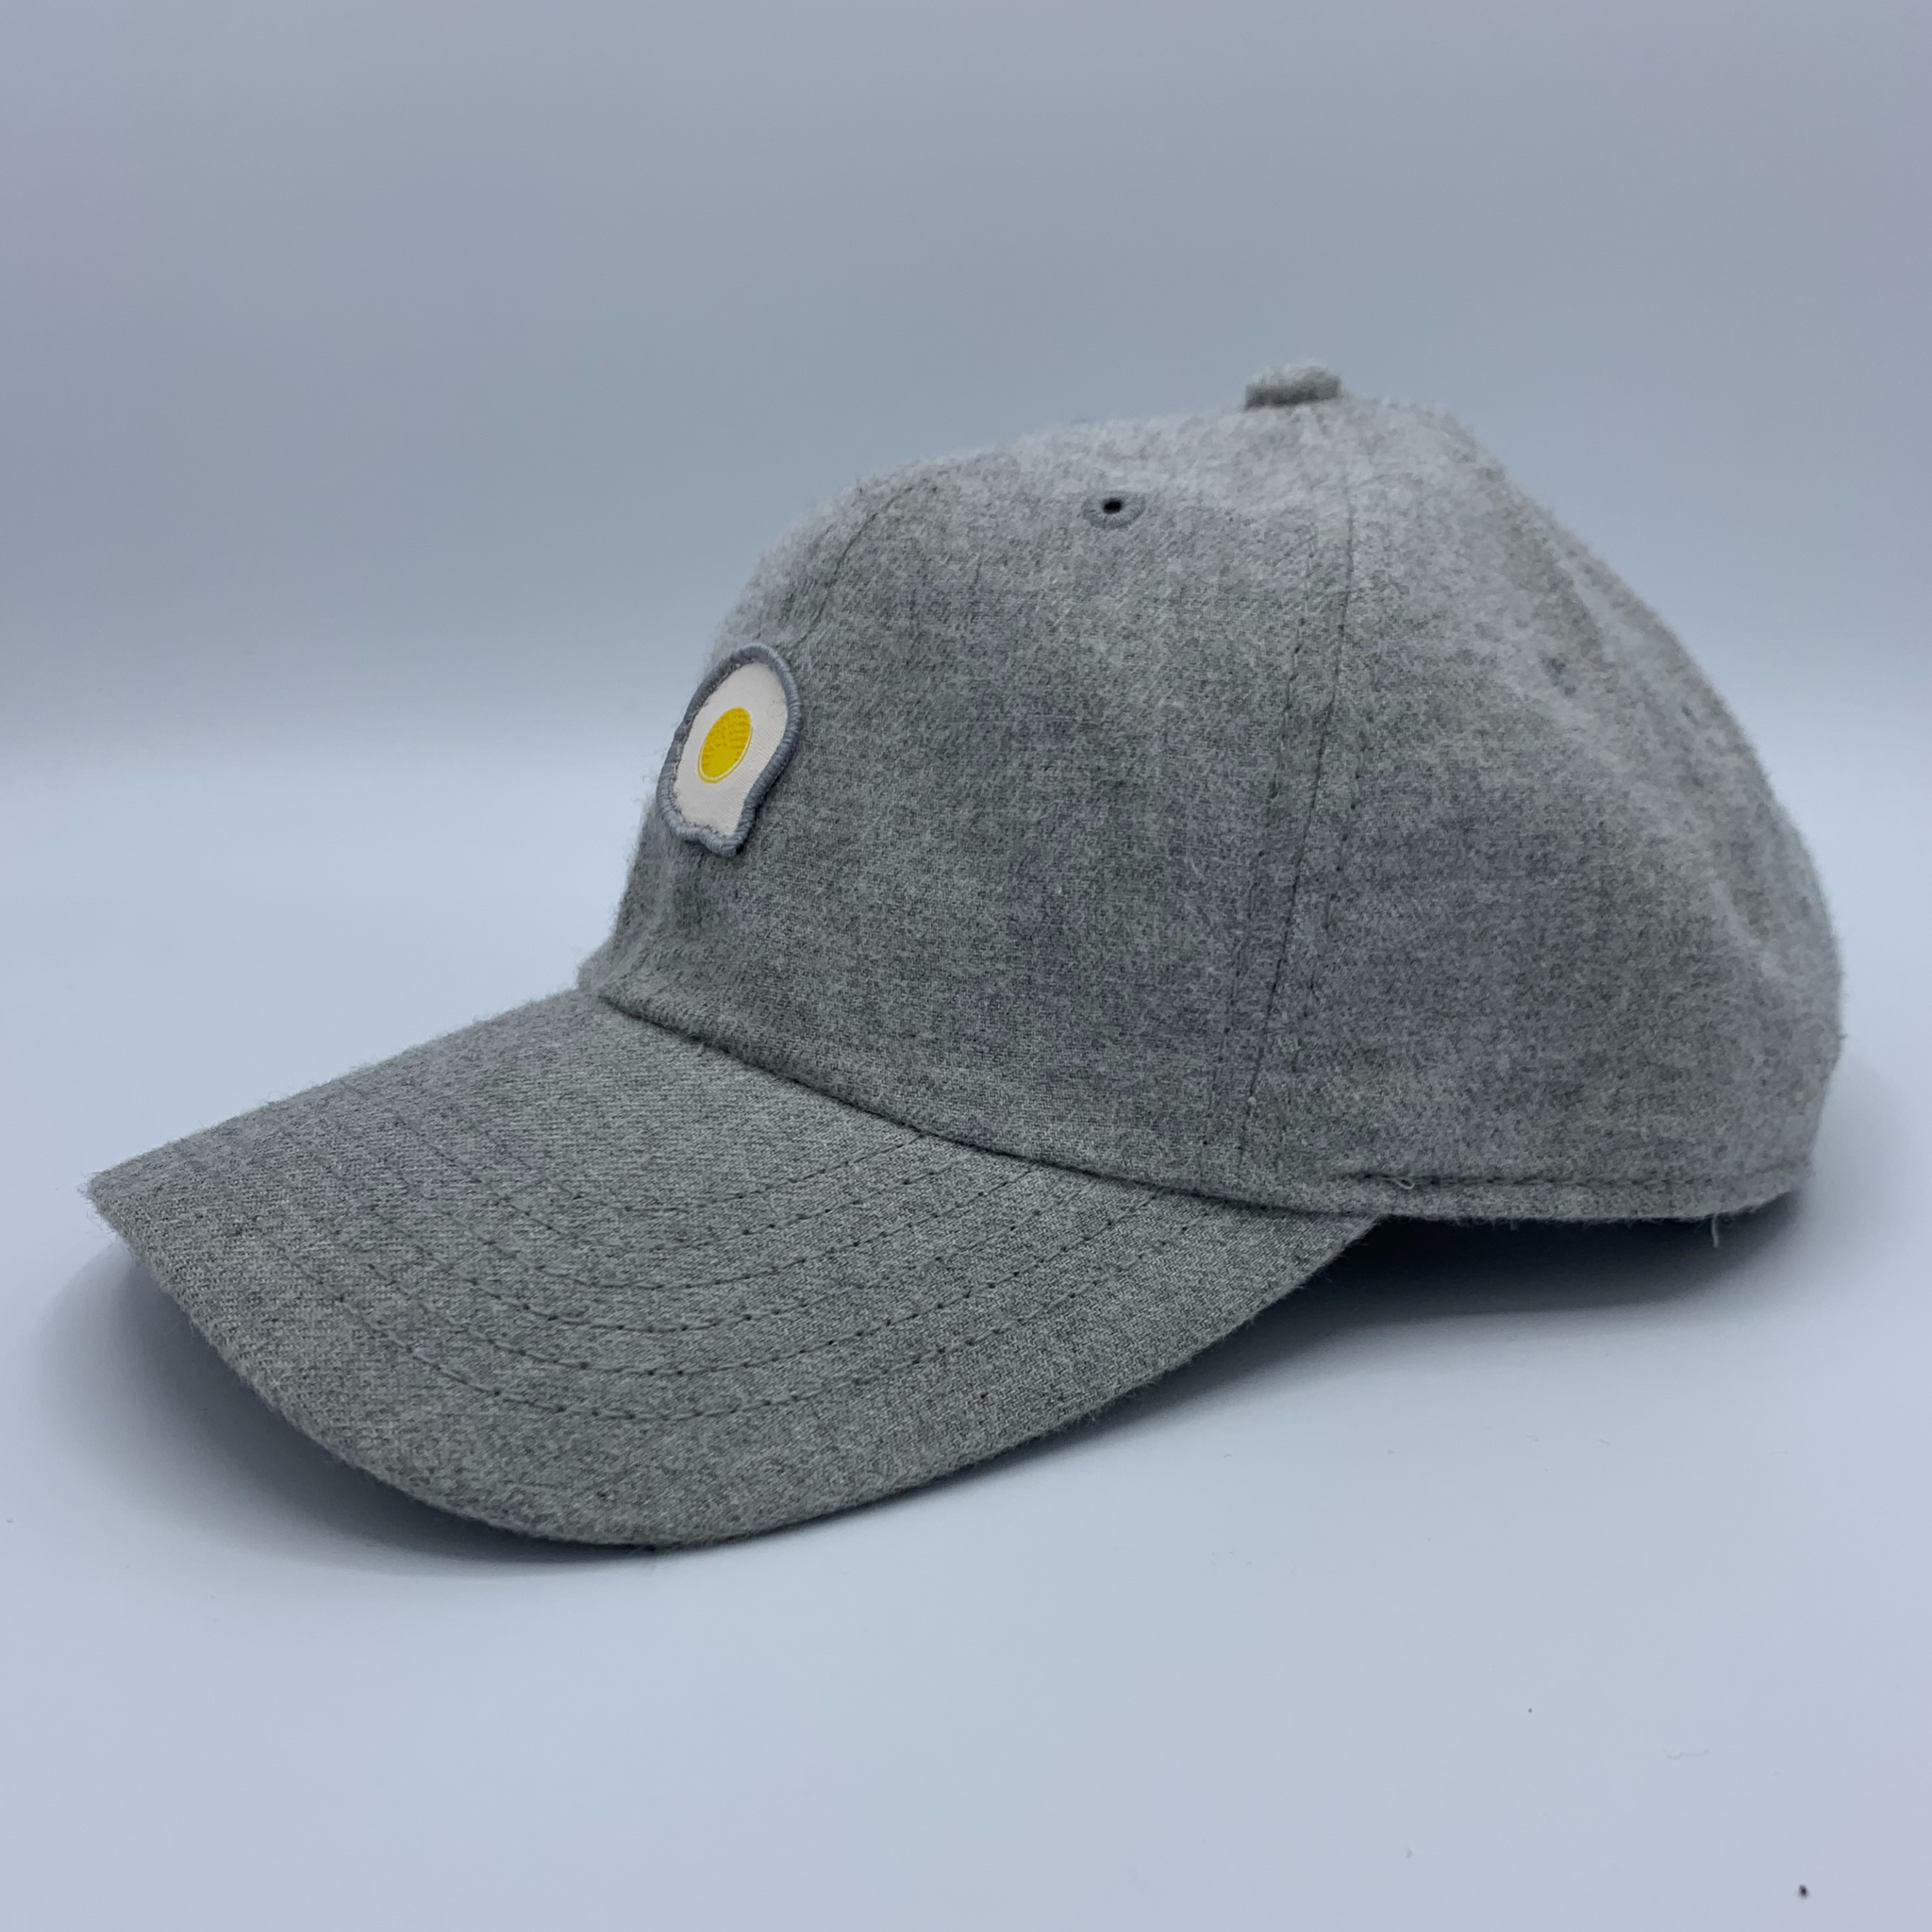 Hats - The Fried Egg